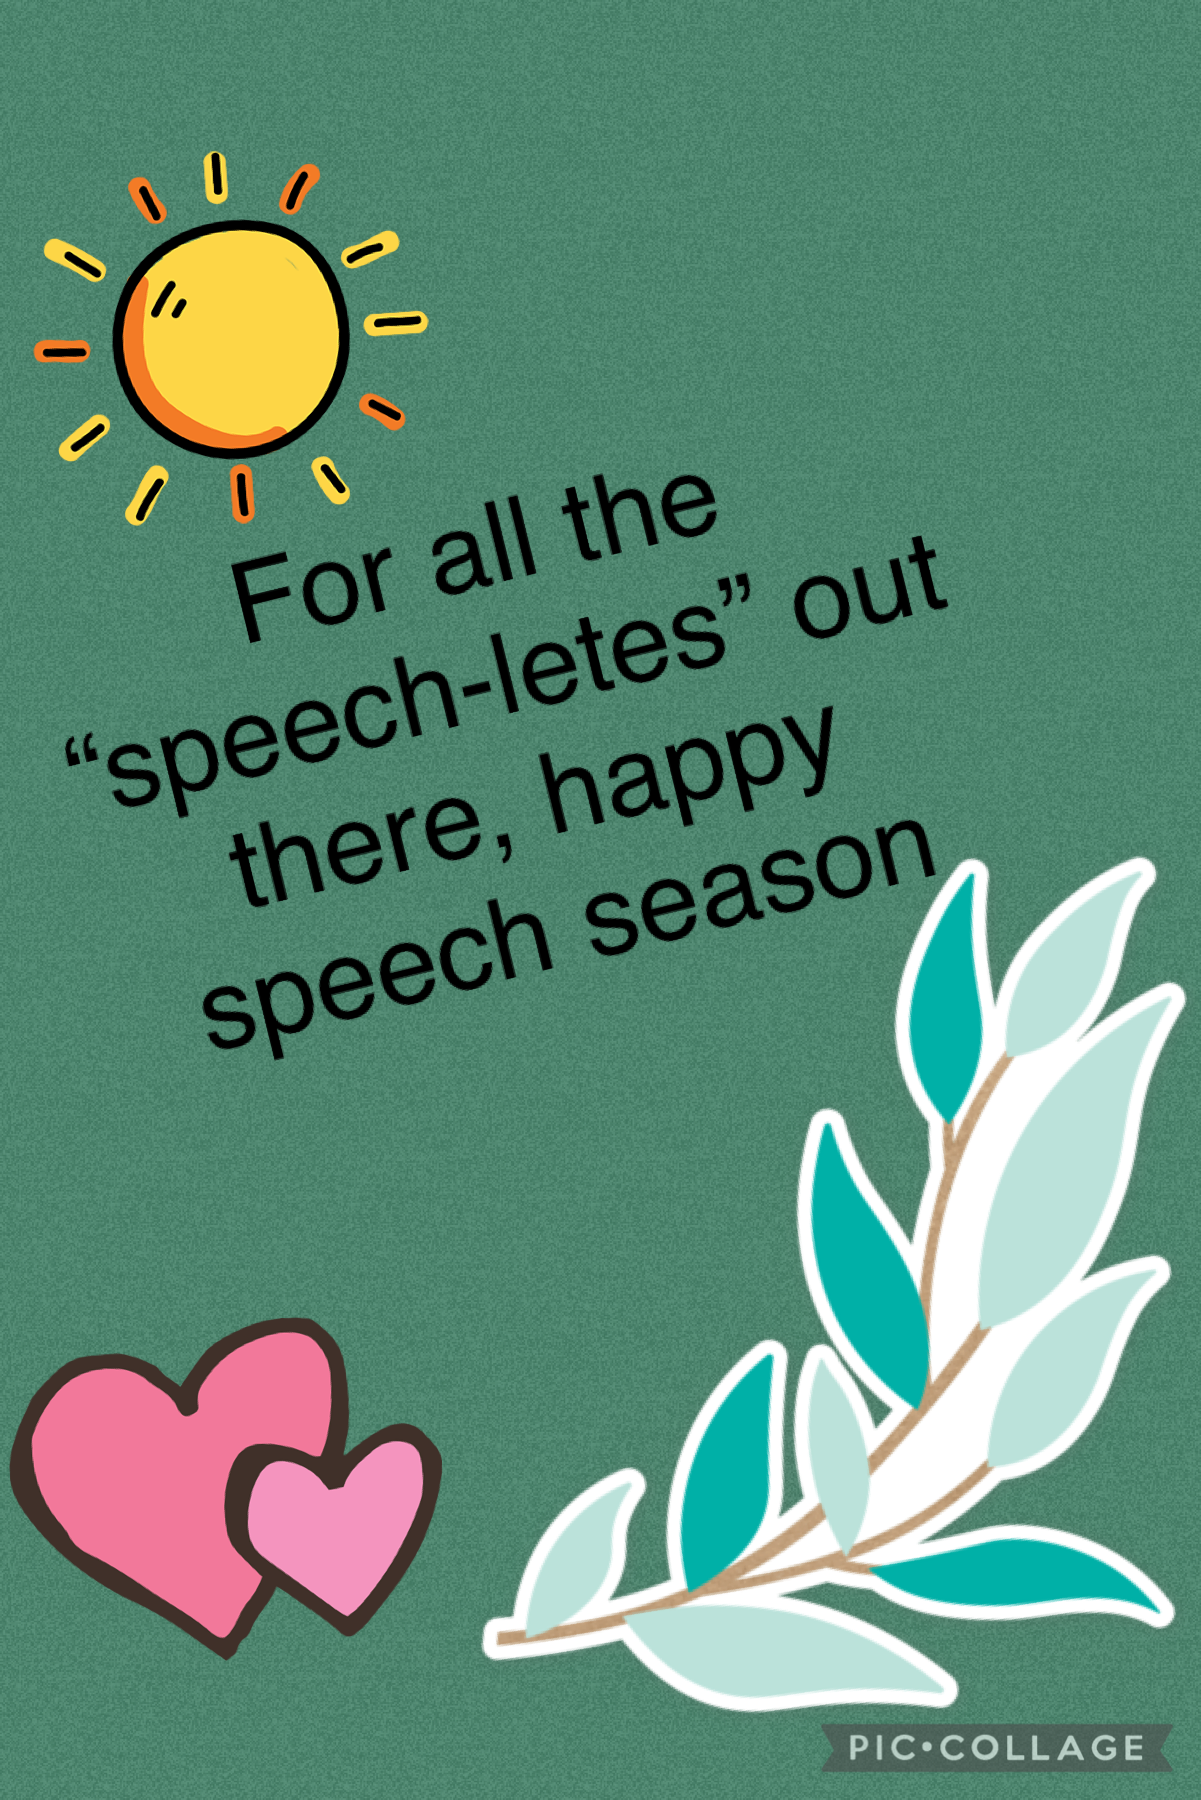 I started speech this weekend and I’m totally supporting the people who do it :) good luck this season!